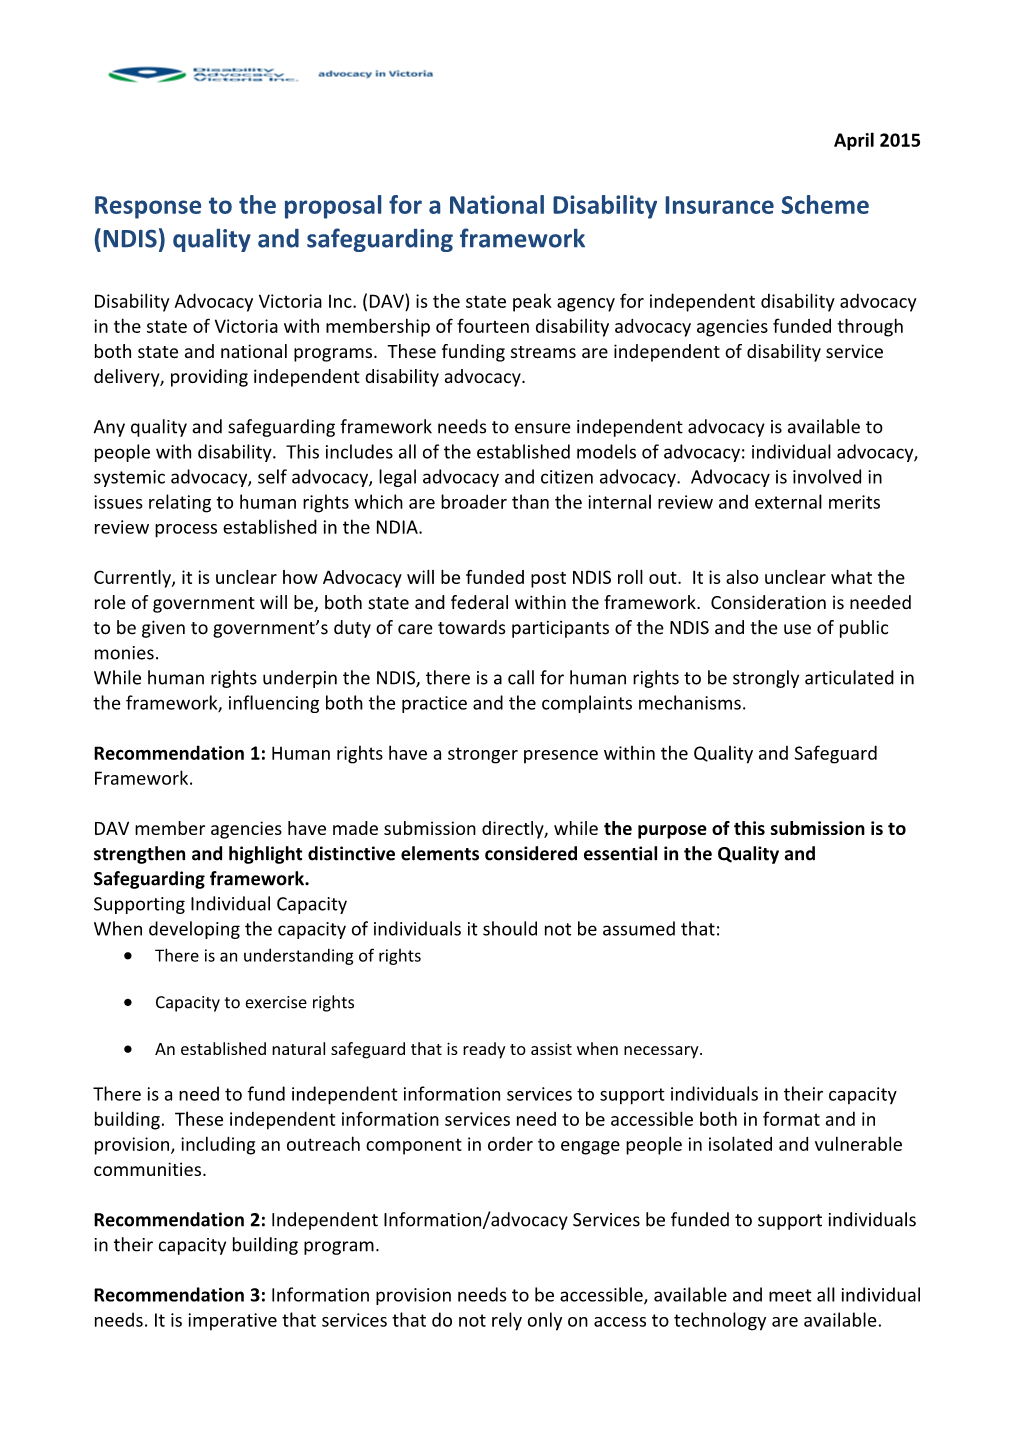 Response to the Proposal for a National Disability Insurance Scheme (NDIS) Quality And